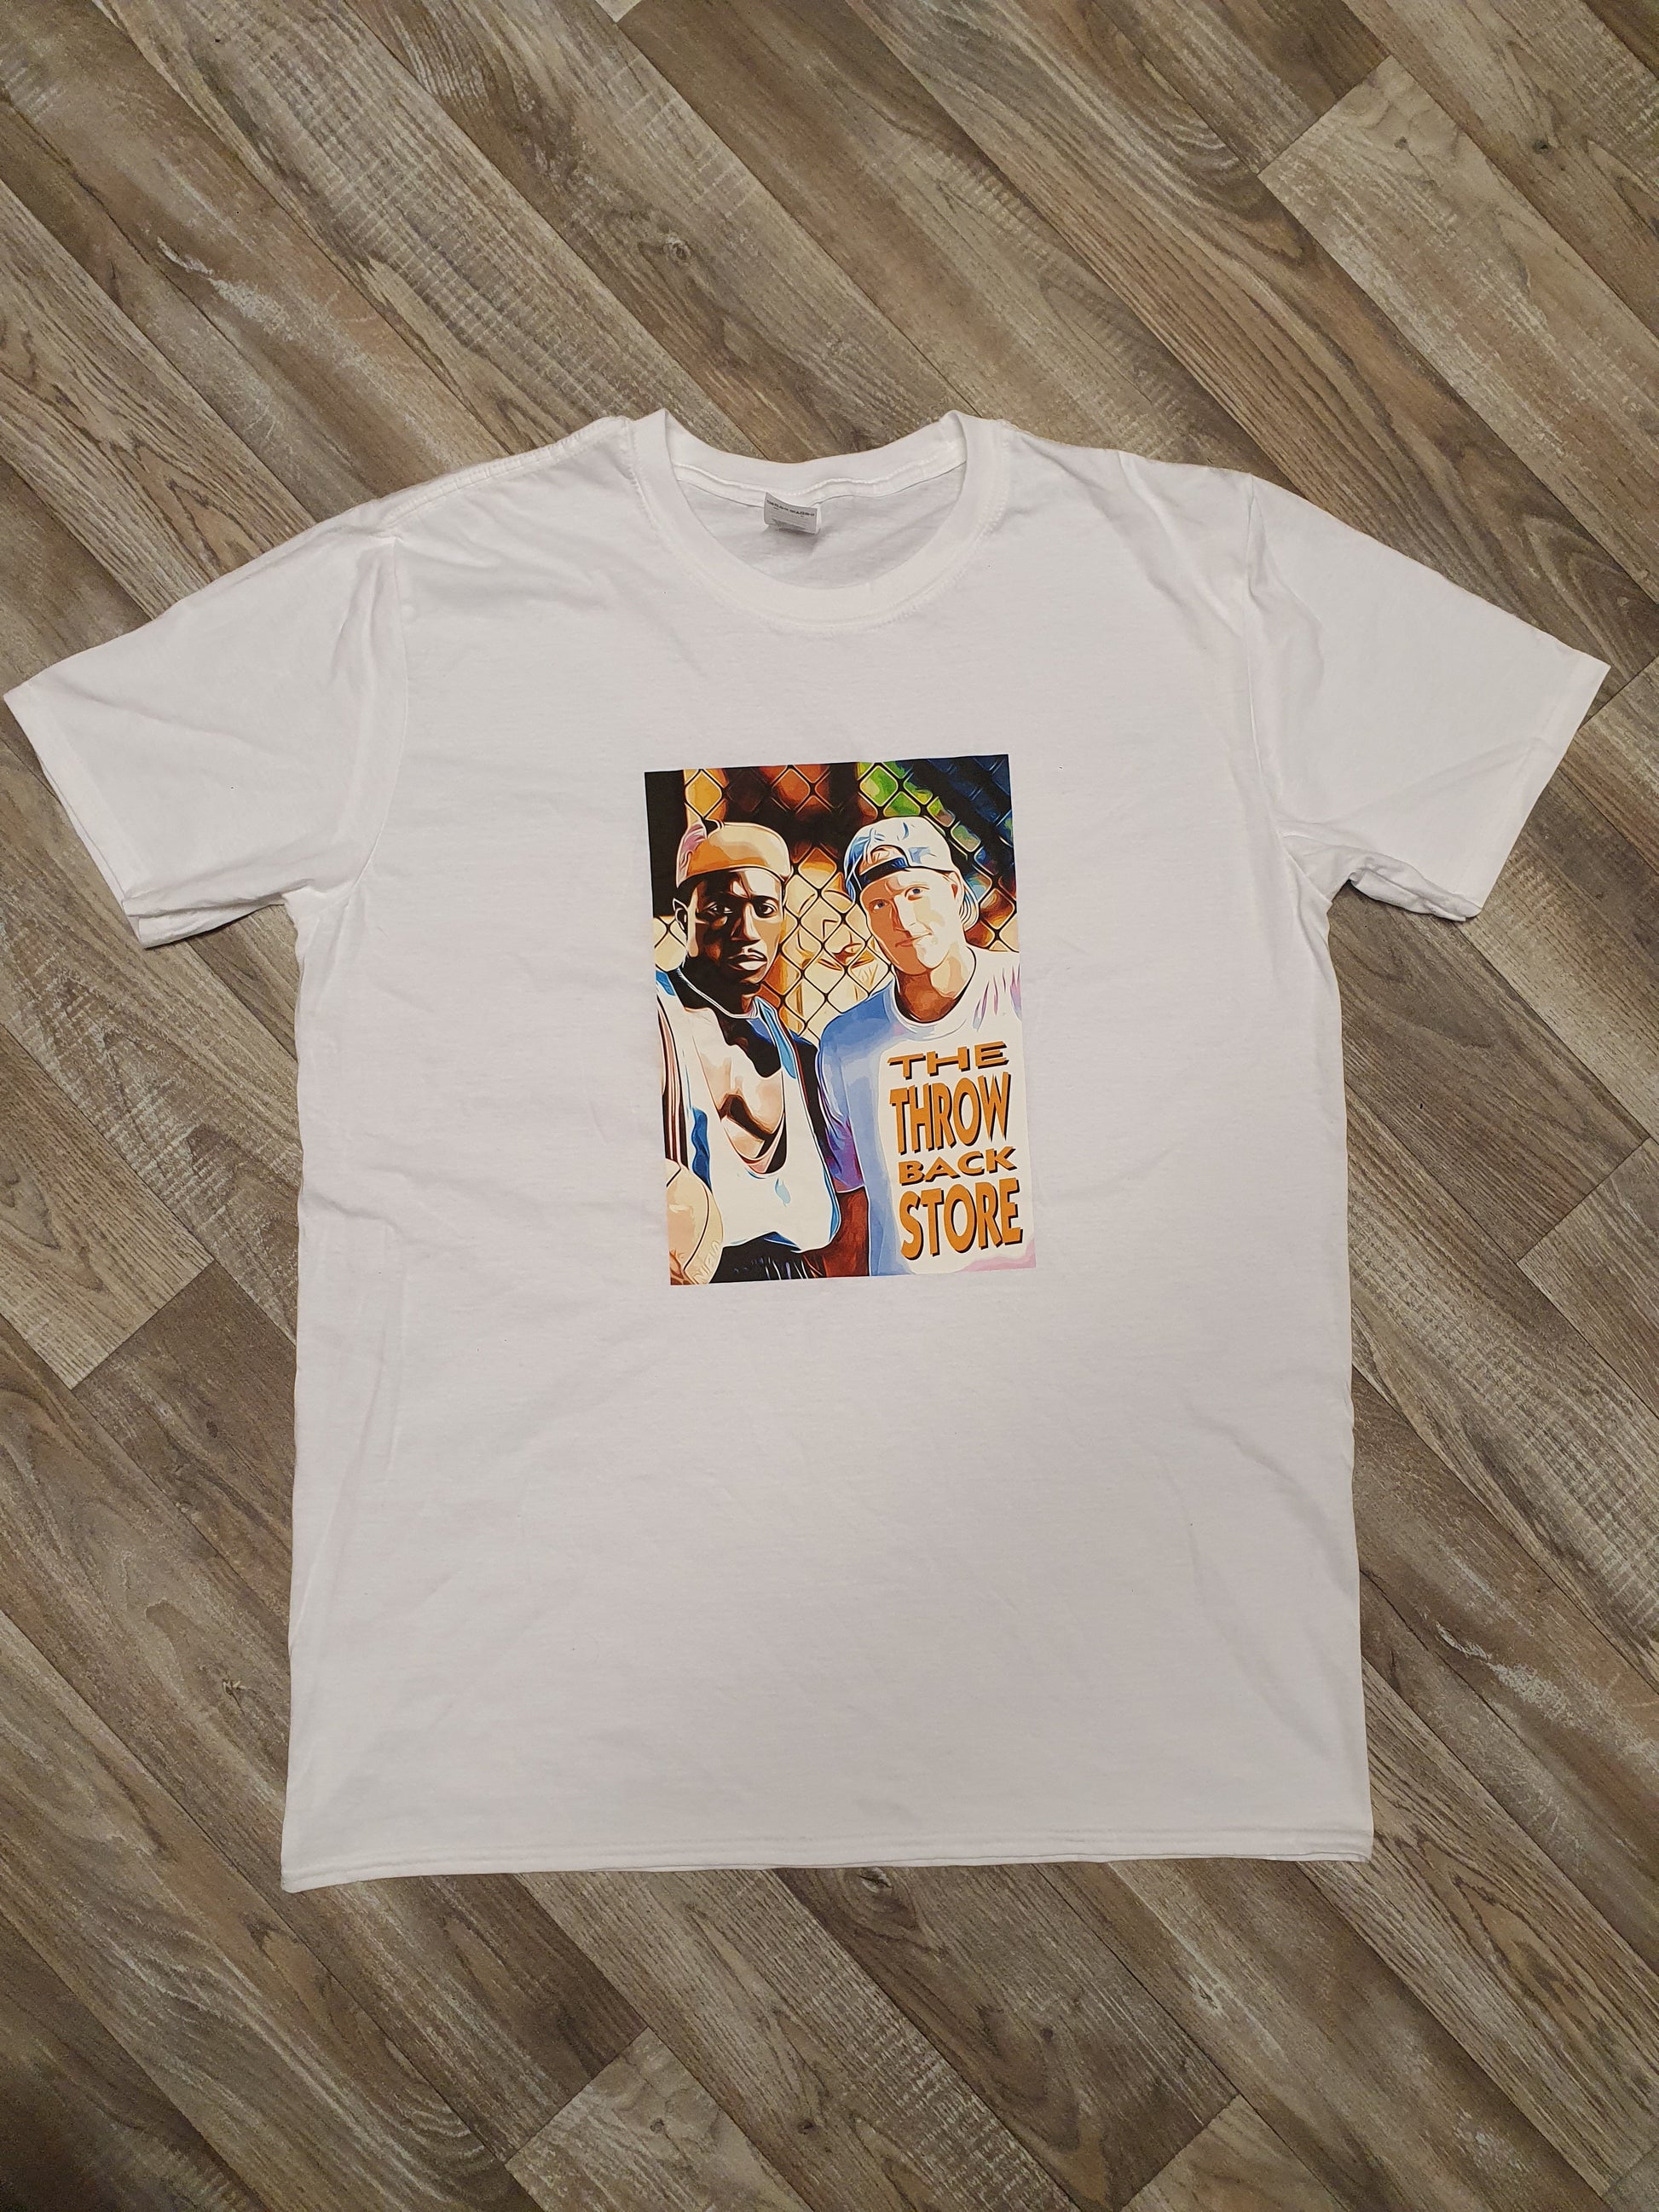 White Men Cant Jump White T-Shirt Size S M L and XL